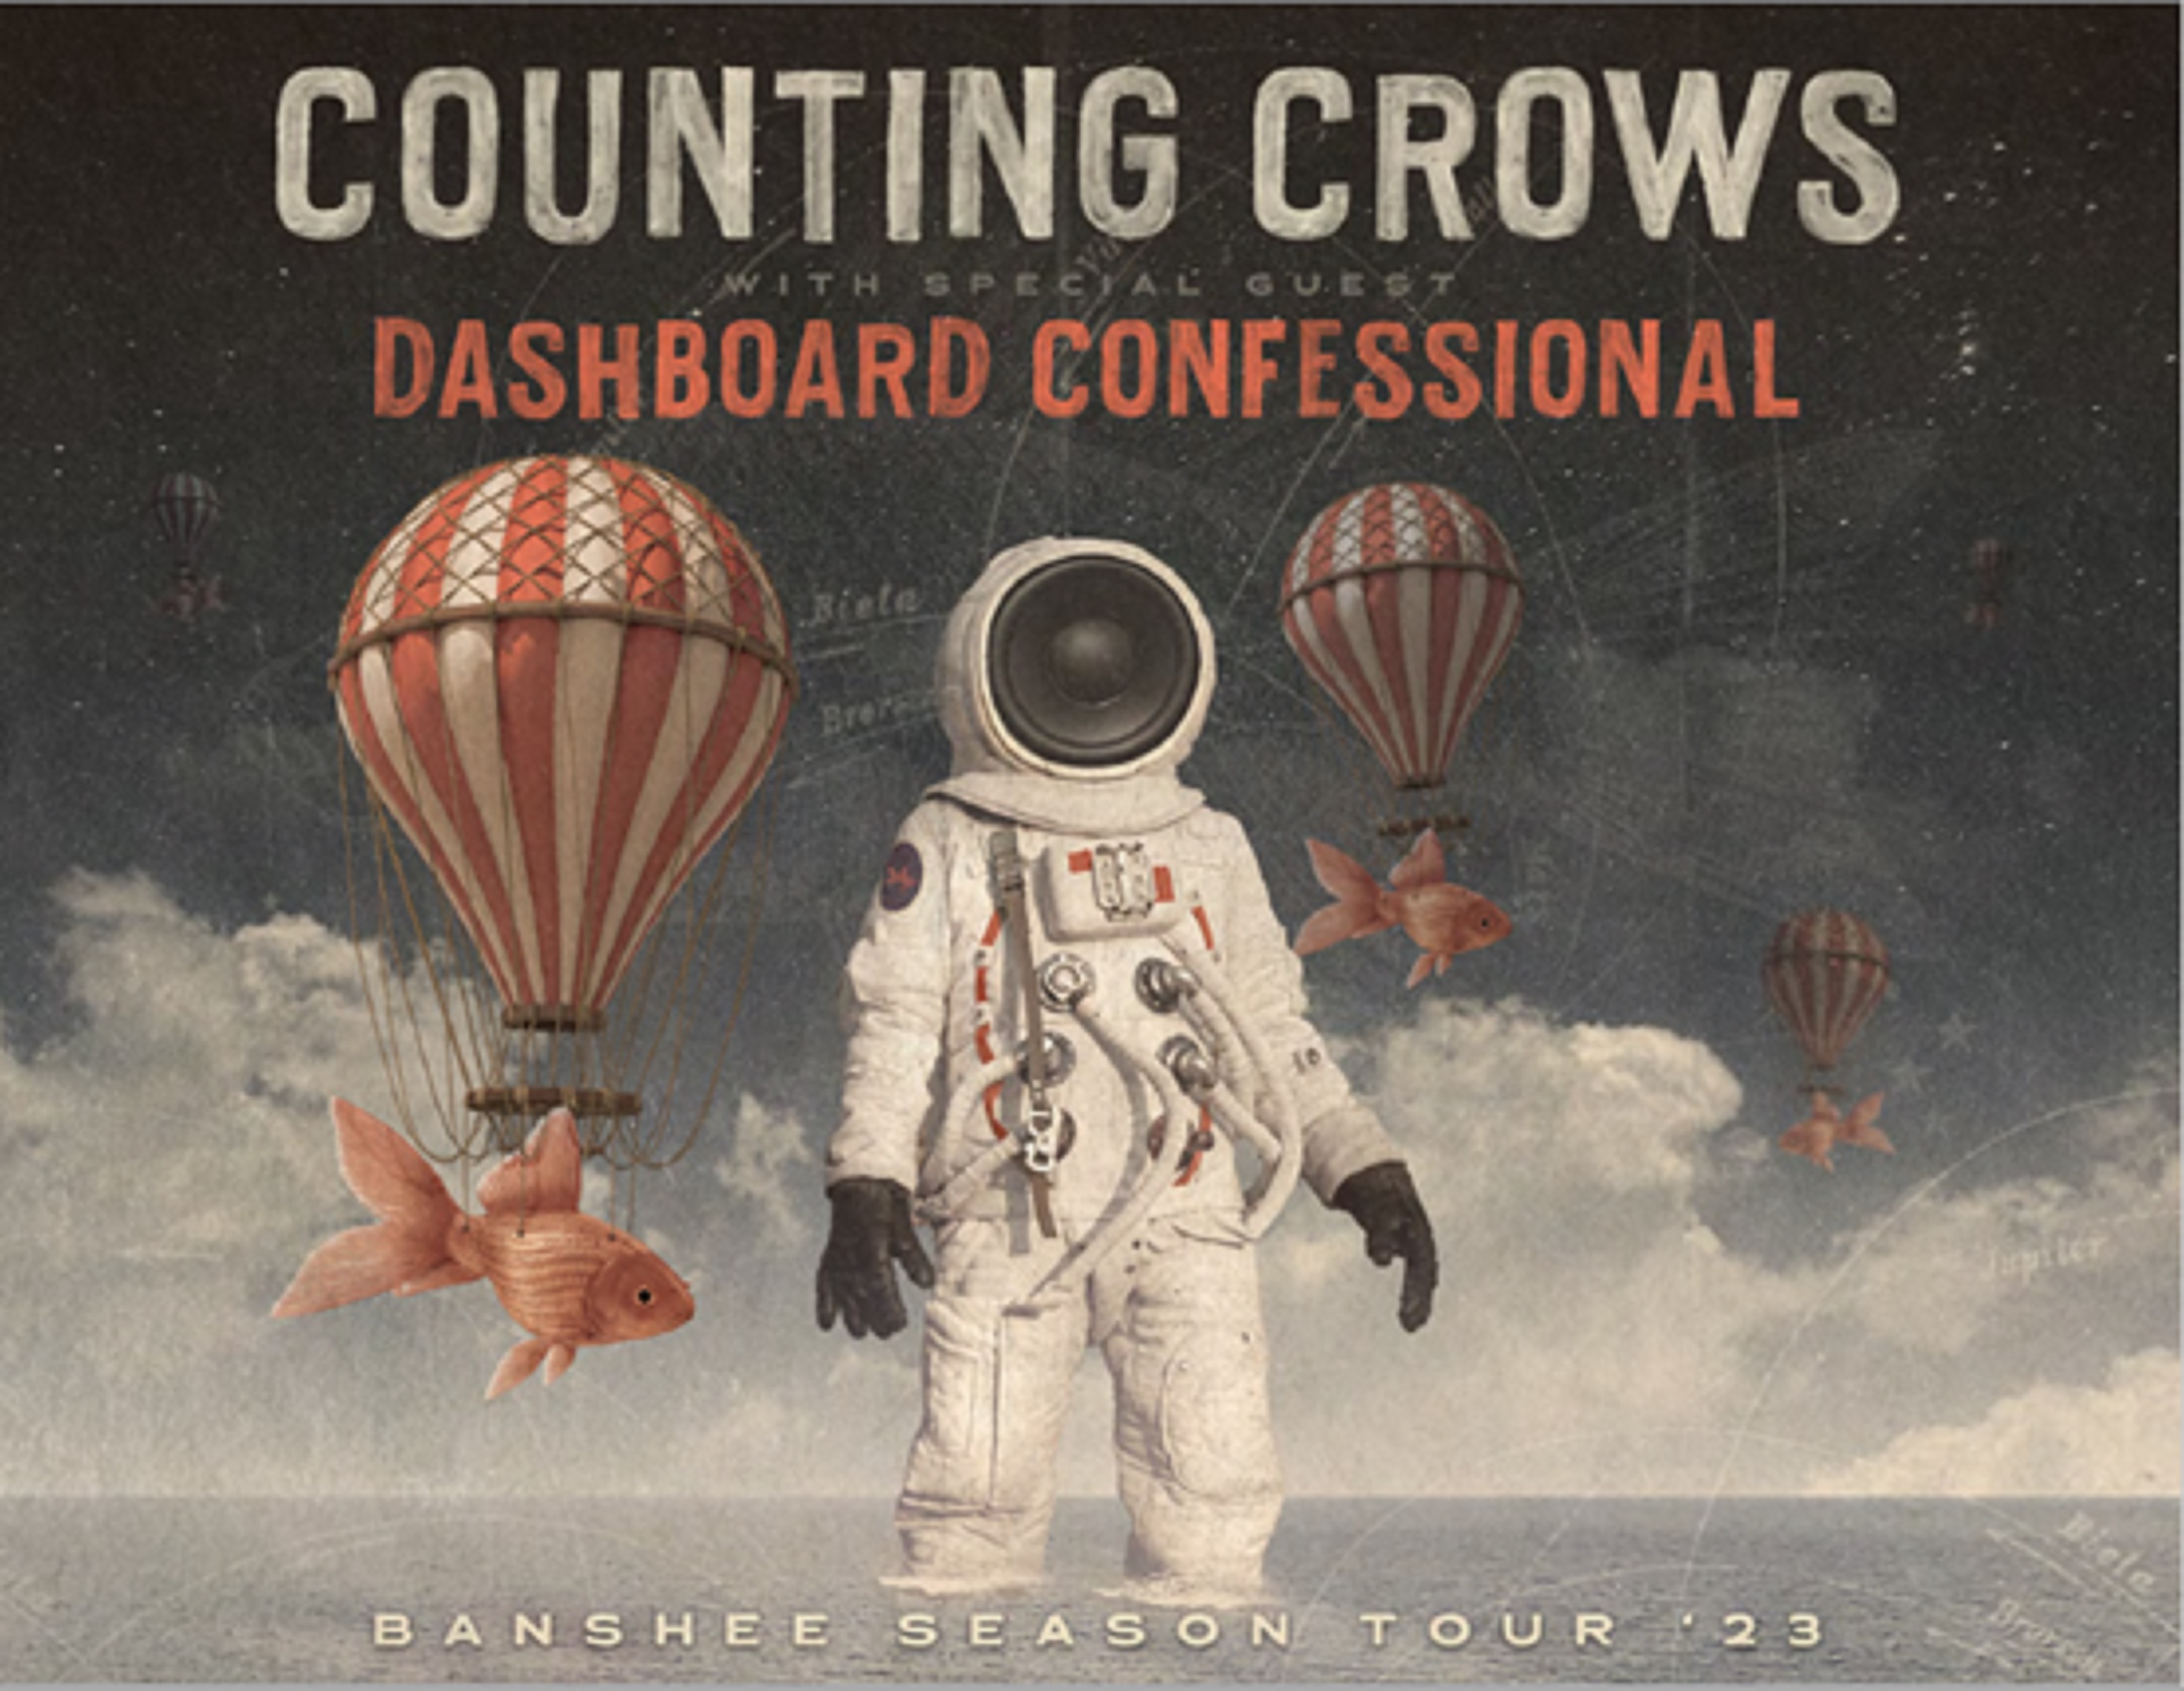 Dashboard Confessional to join Counting Crows for 'Banshee Season Tour'